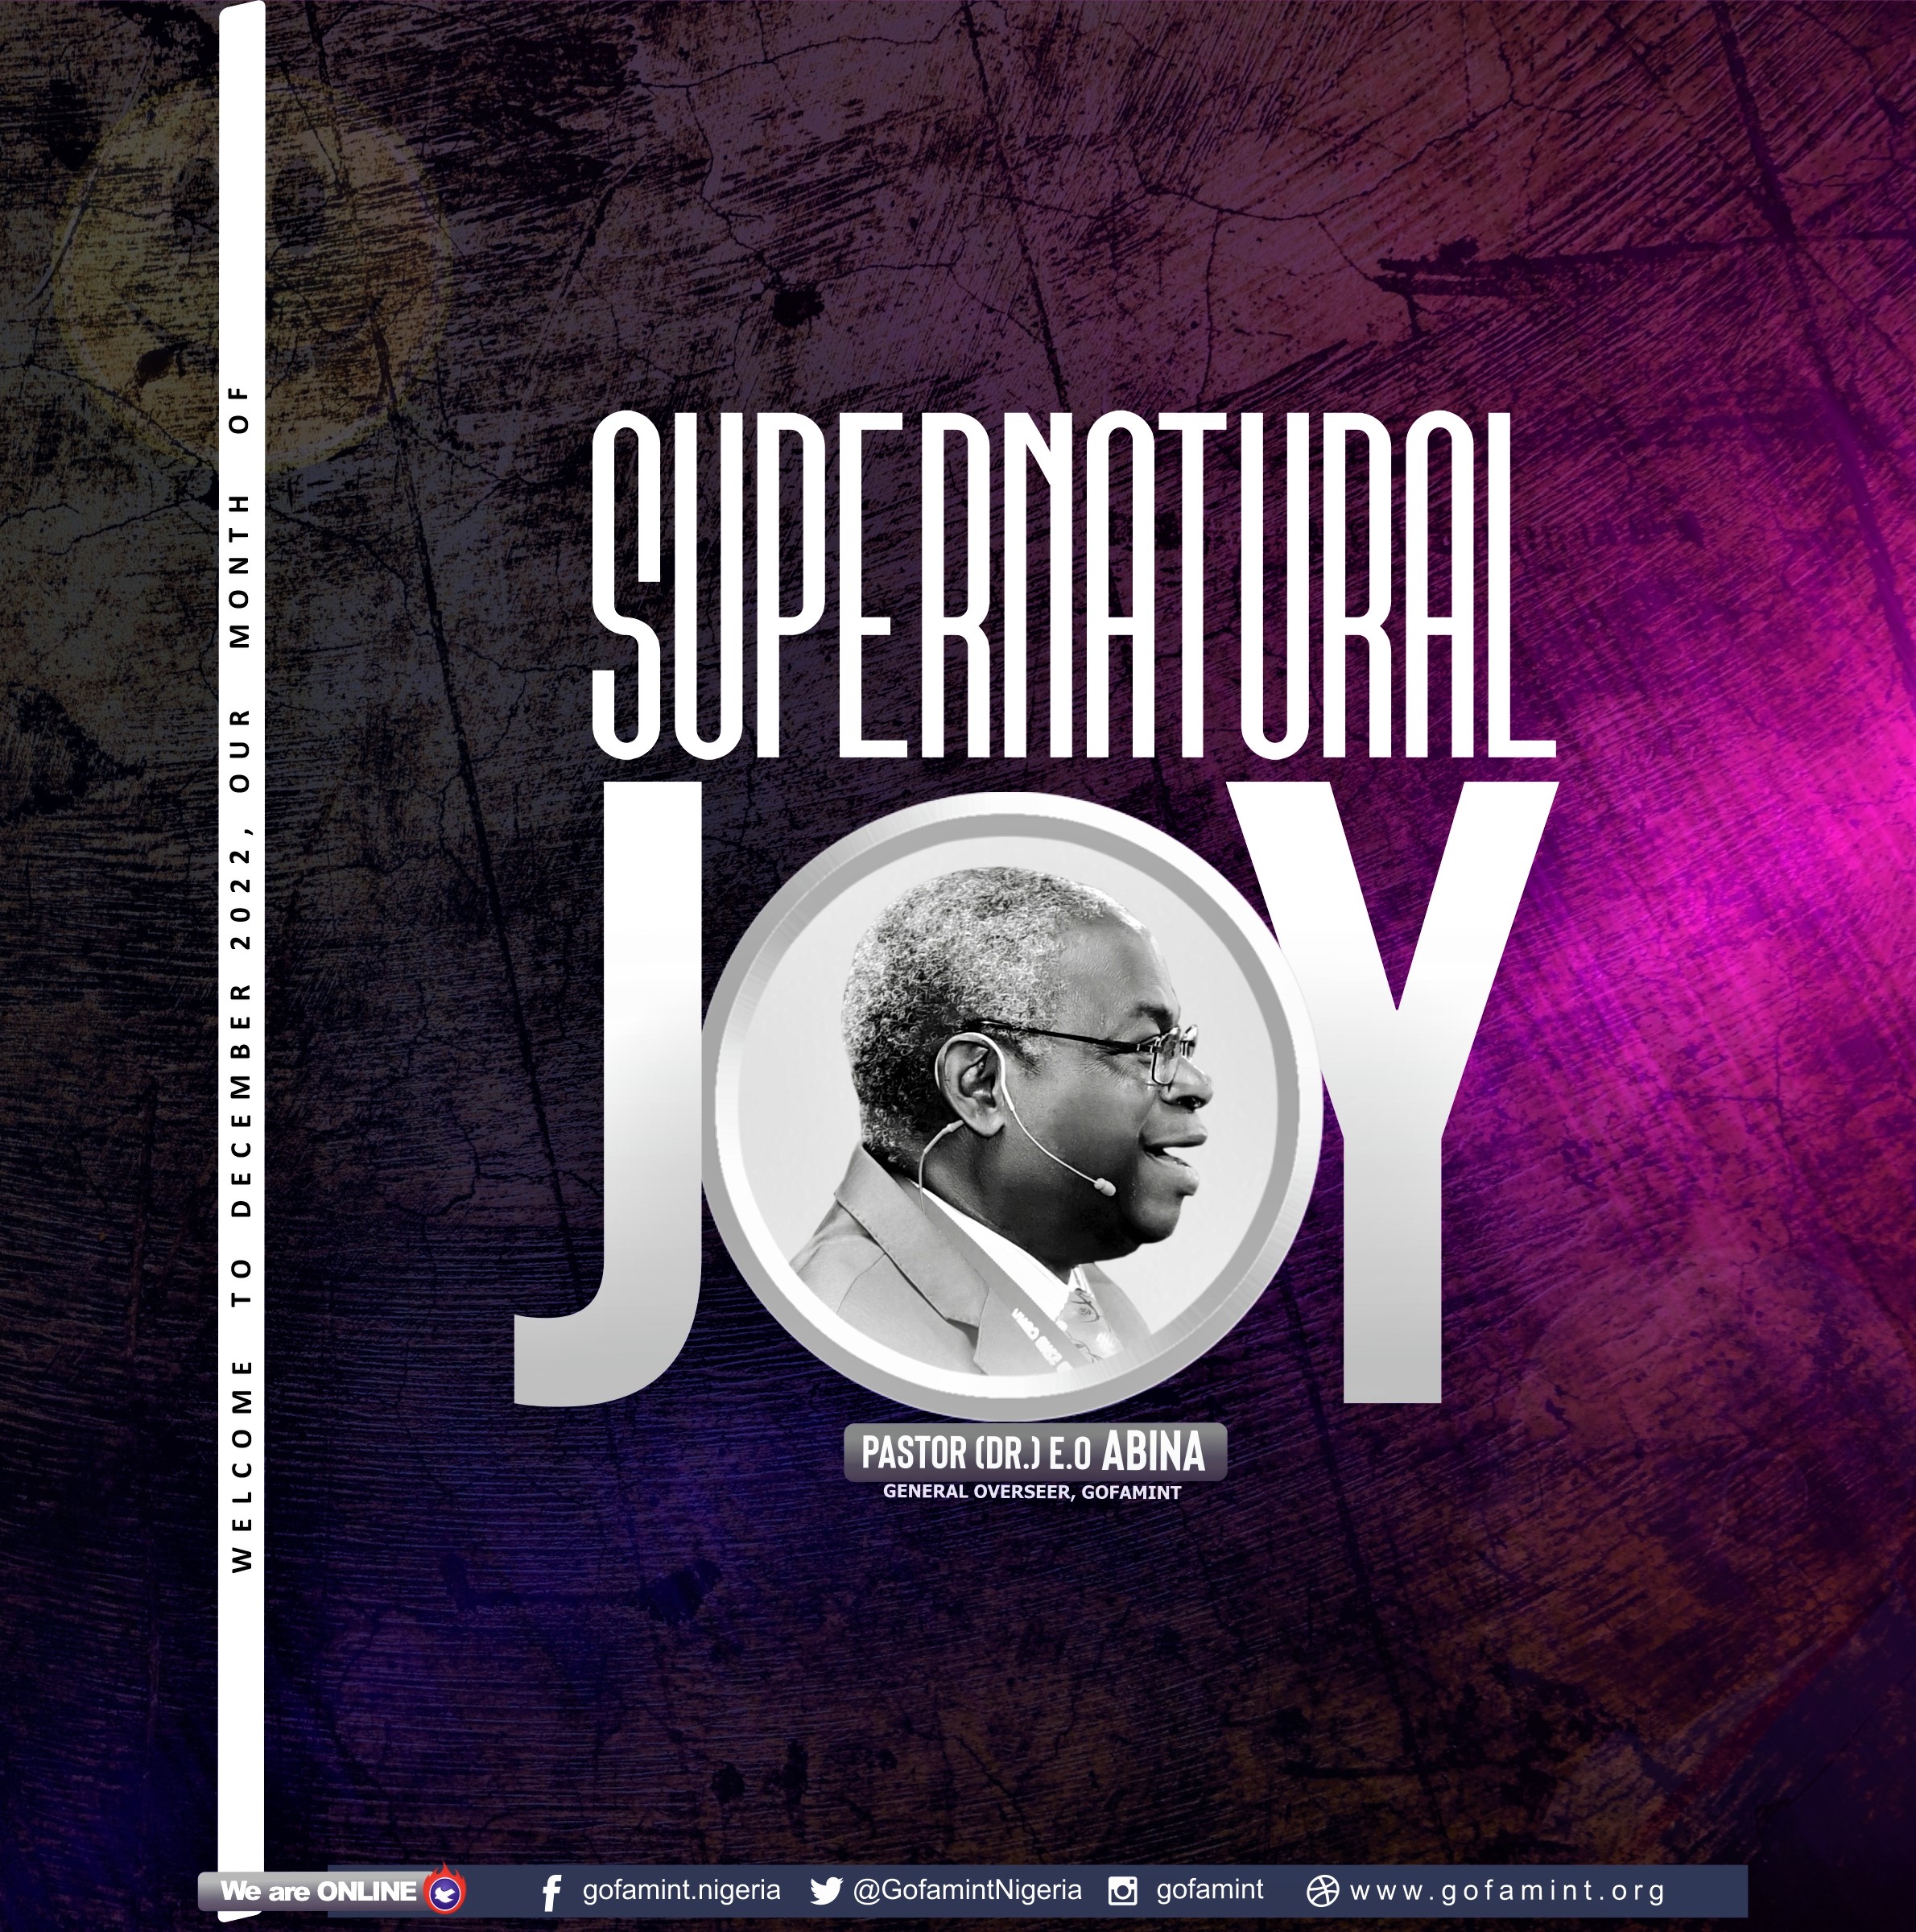 WELCOME TO DECEMBER 2022 – OUR MONTH OF SUPERNATURAL JOY